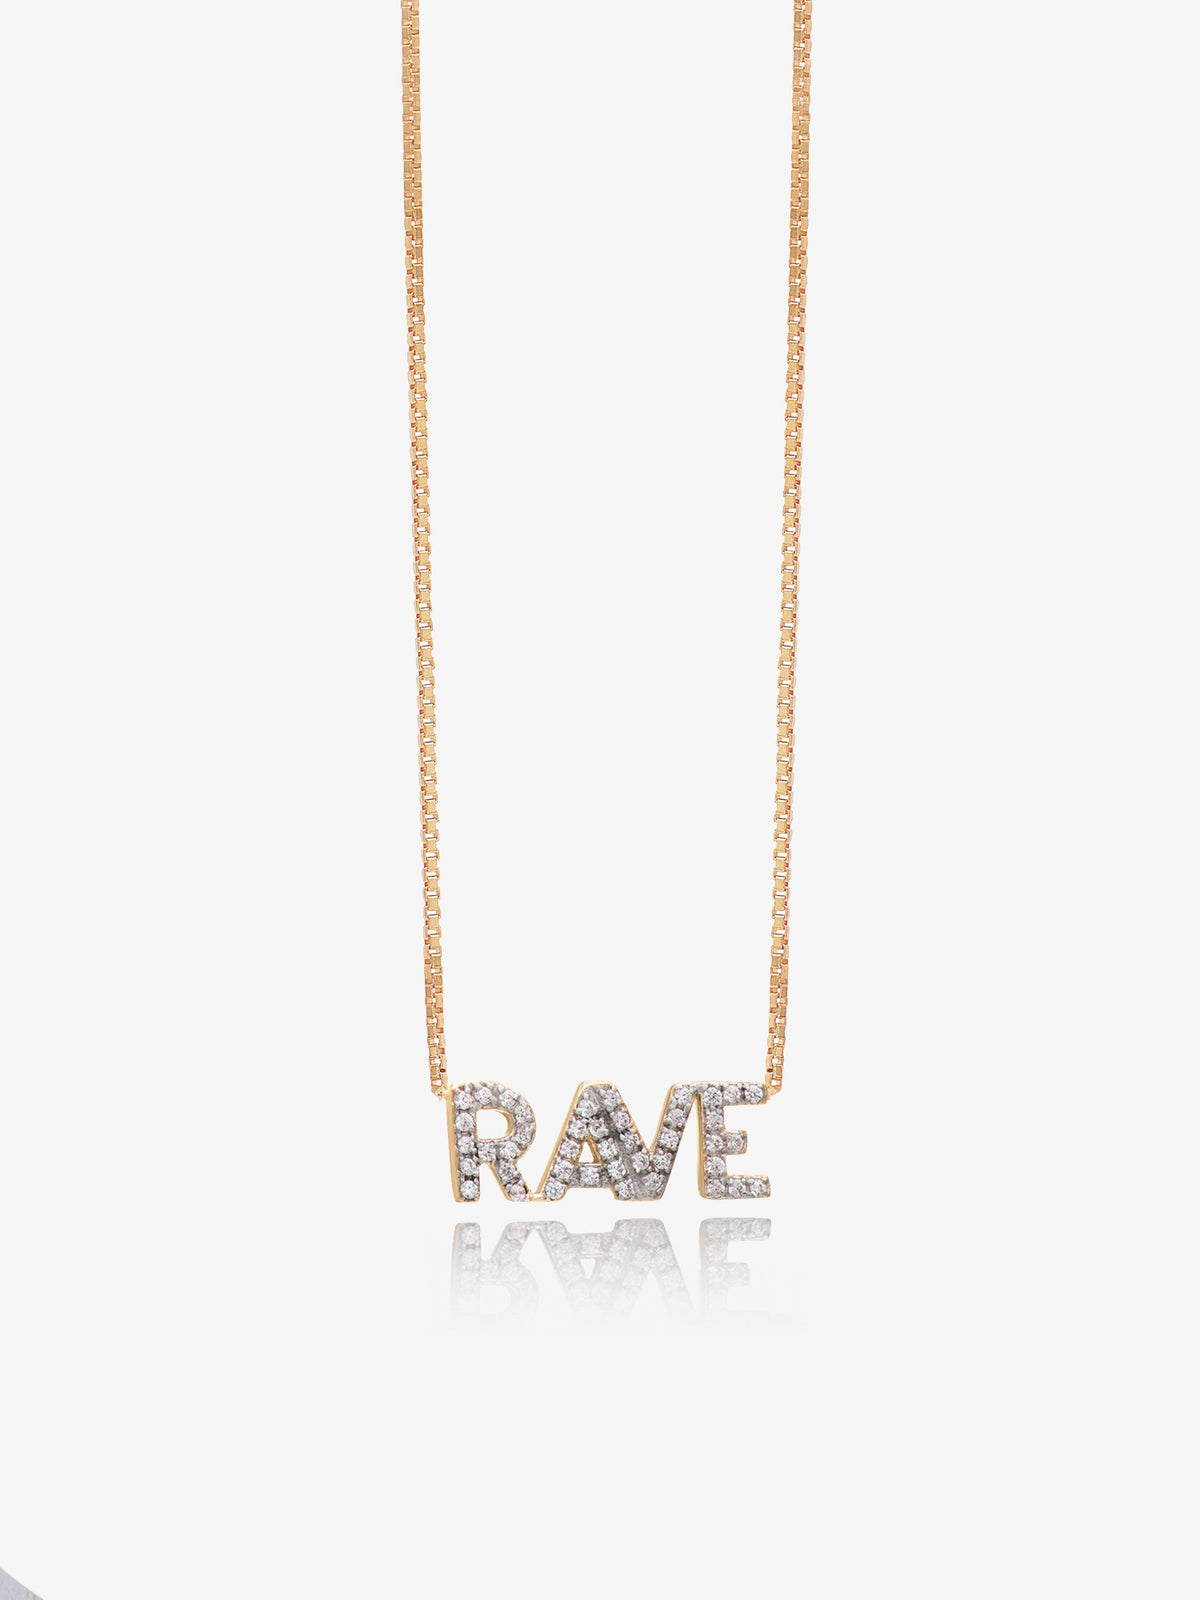 Solid Gold and Diamond Pave Mini Rave Necklace